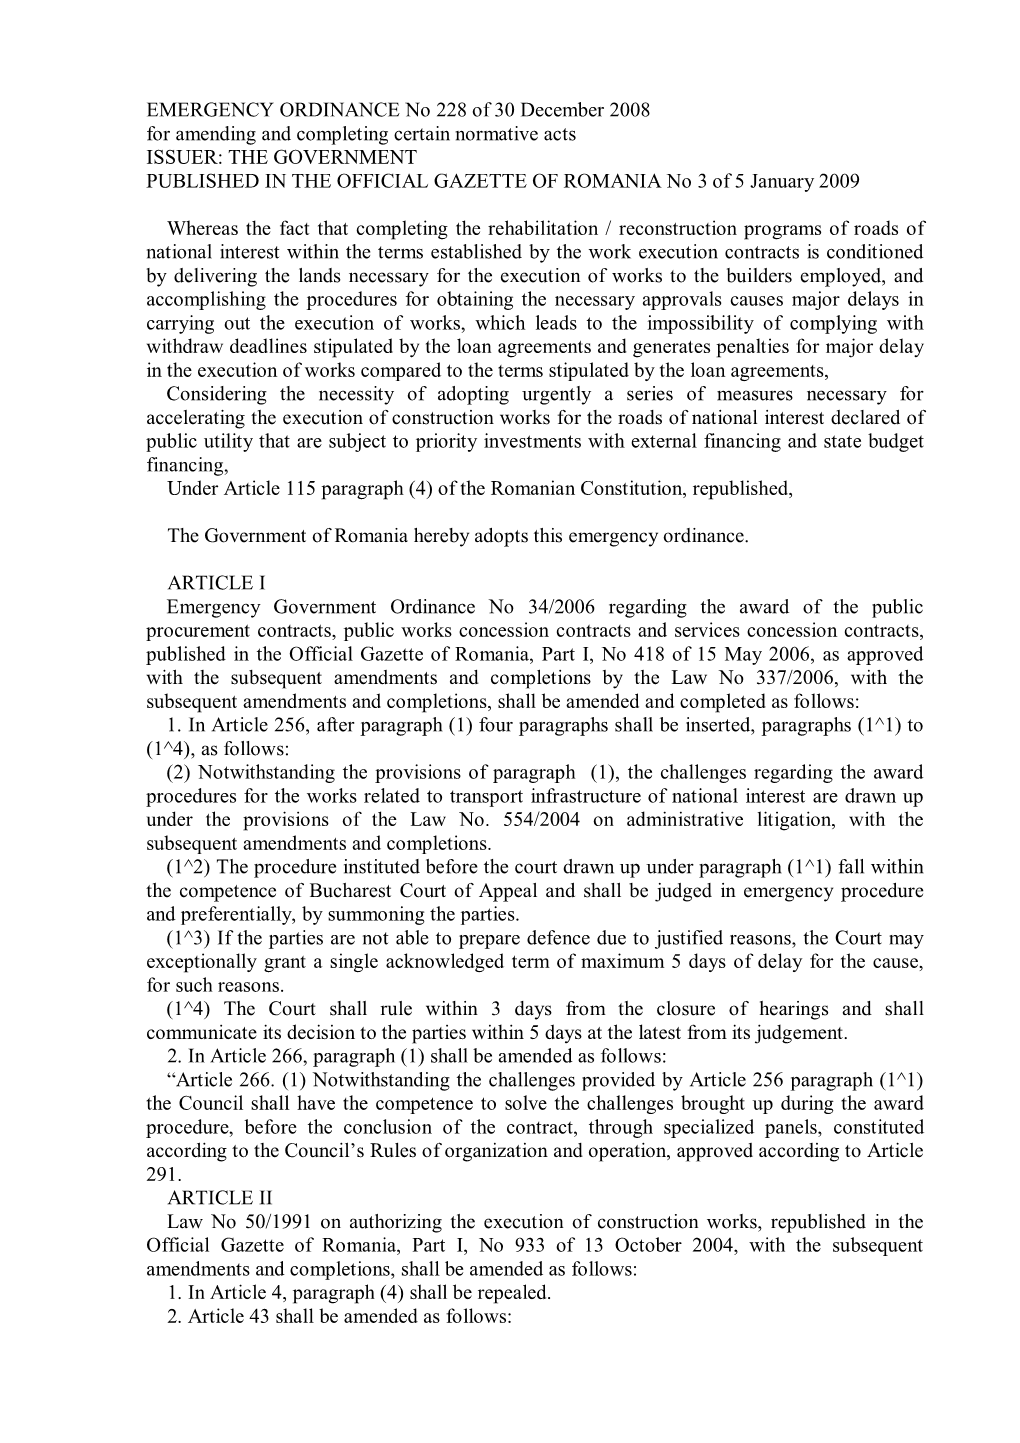 EMERGENCY ORDINANCE No 228 of 30 December 2008 for Amending